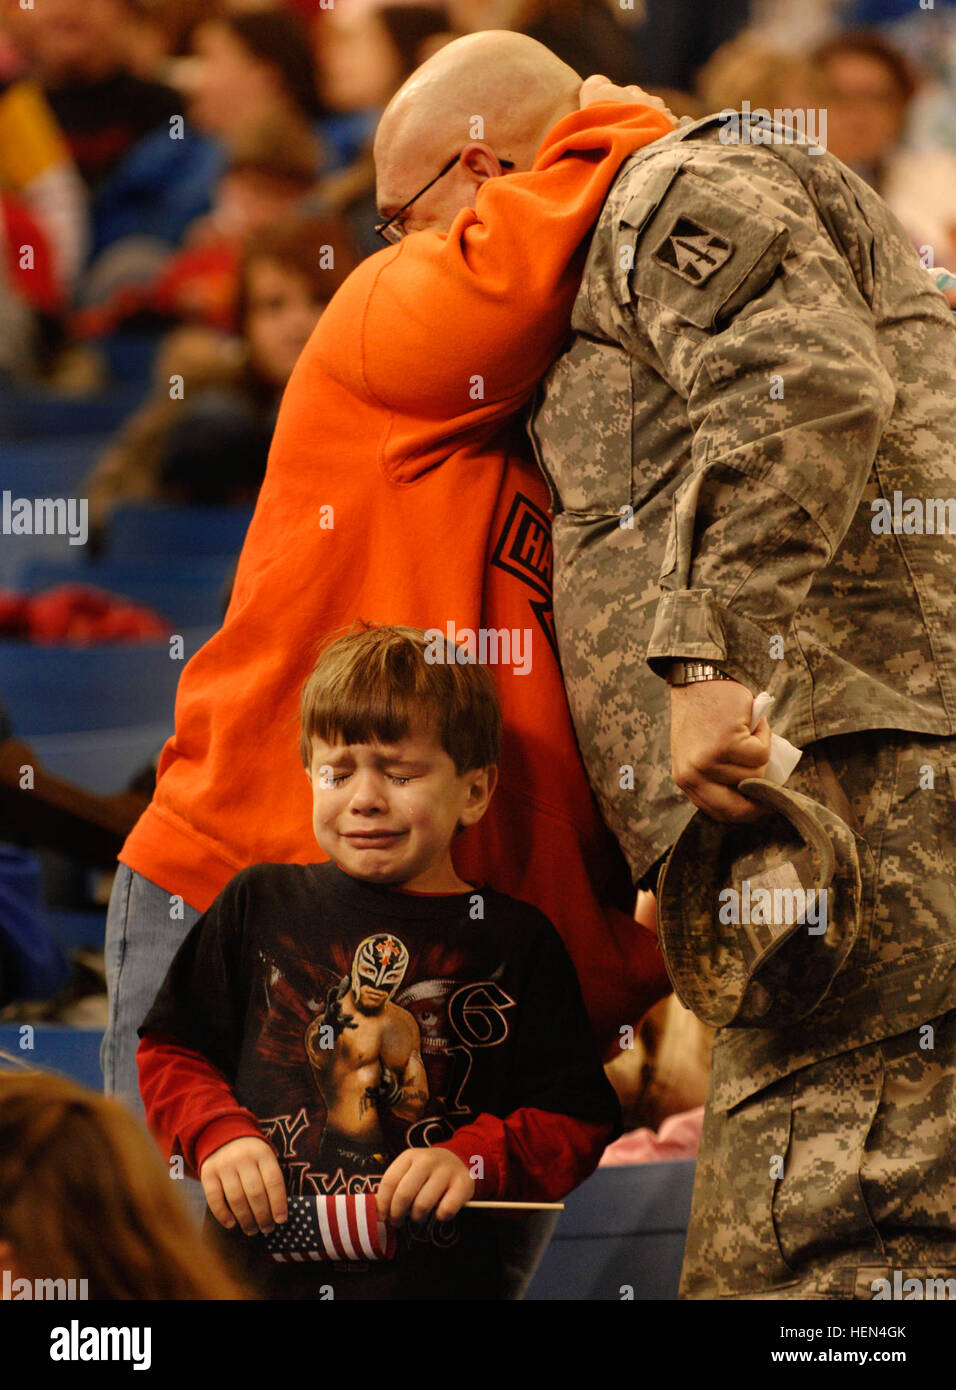 Sgt. Shane Pudgett hugs his wife goodbye as his son, Bryce, age 5, sheds a tear on Jan. 2 at the RCA Dome in Indianapolis. This will be the largest Indiana National Guard deployment since World War II, with more than 3,400 Soldiers from about 30 Indiana communities are scheduled to deploy to Iraq for 12-months. The brigade, headquartered in Indianapolis, is commanded by Col. Courtney Carr and Command Sgt. Maj. Gregory Rhoades. 76th Bde Departure Ceremony 71172 Stock Photo